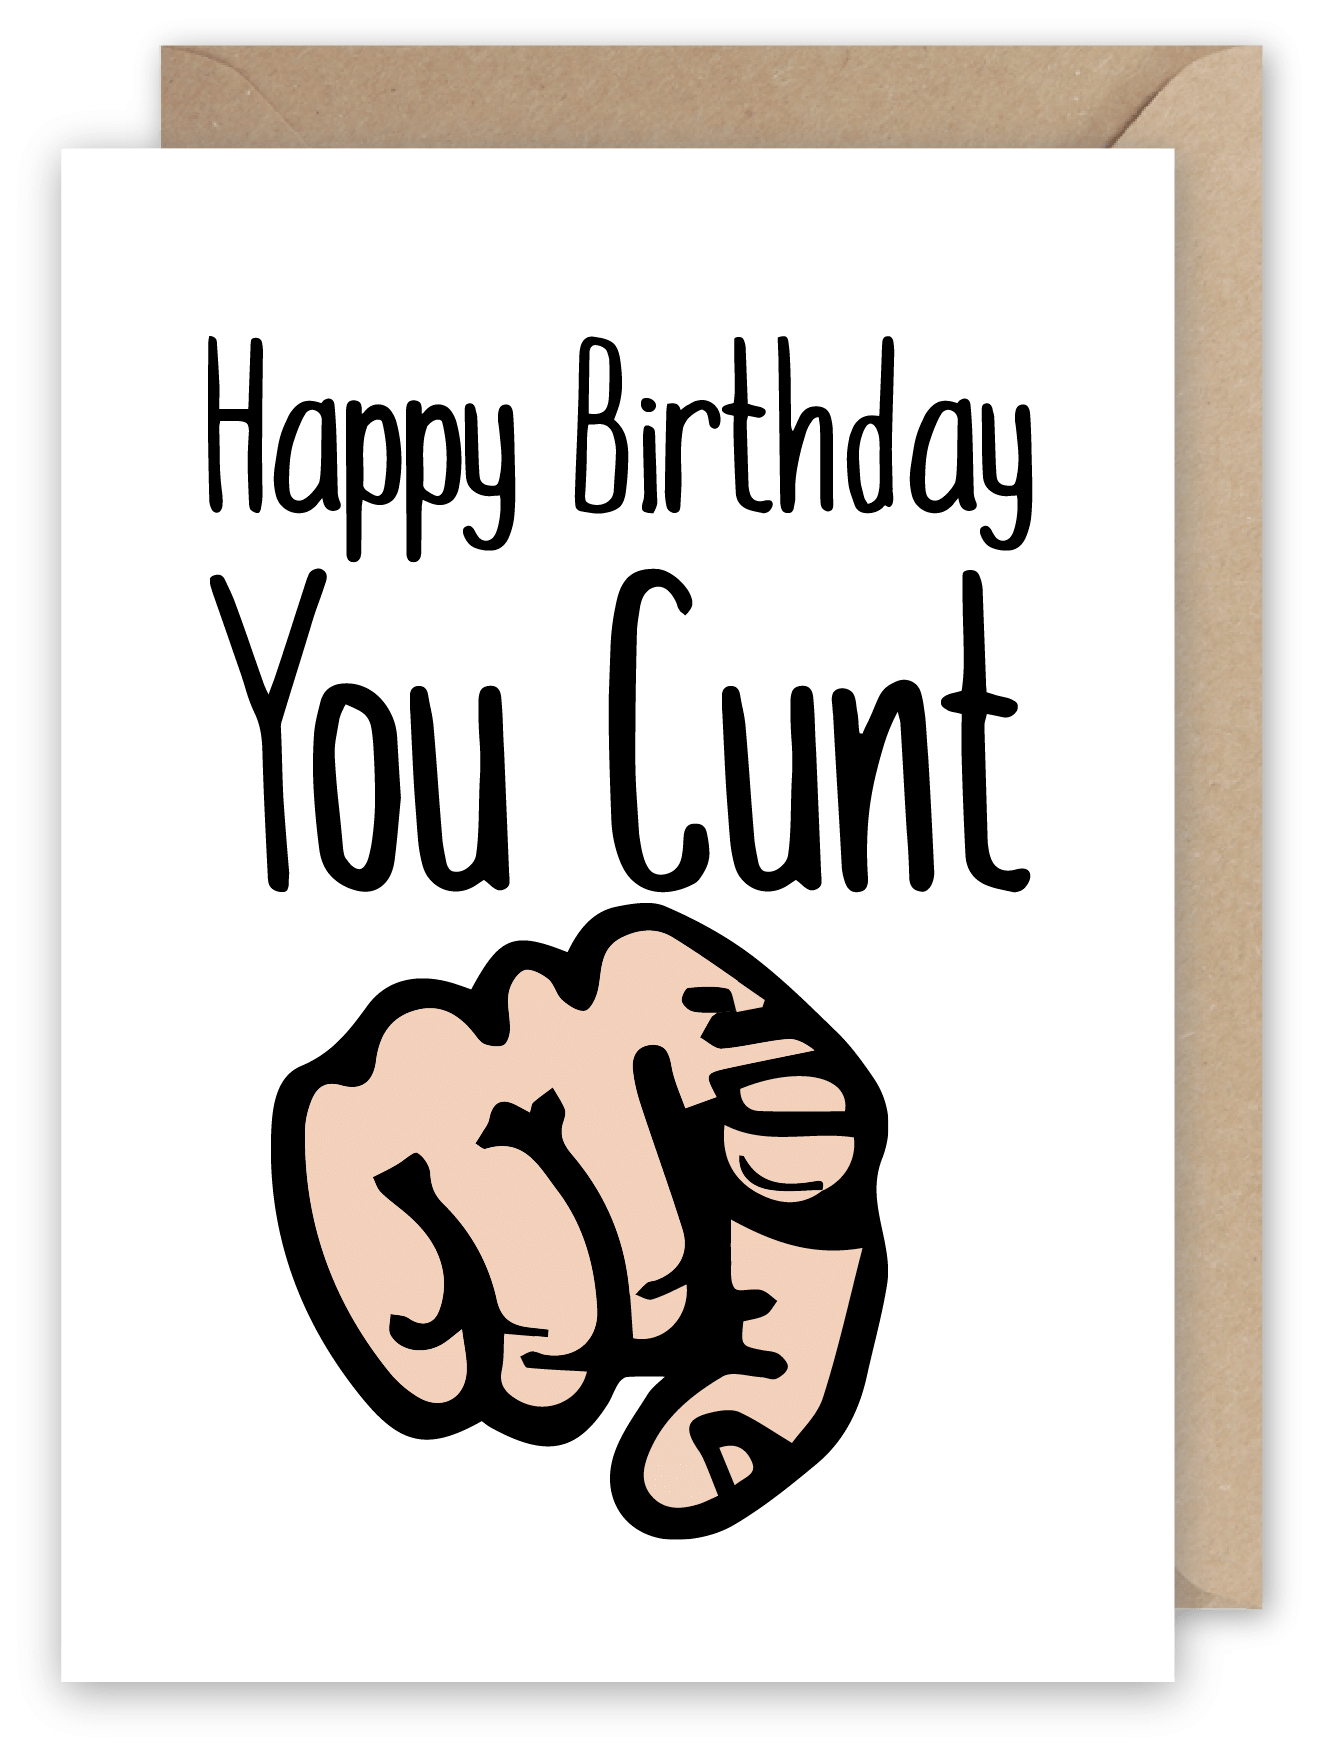 Birthday Cunt Greeting Card From Pheasant Plucker